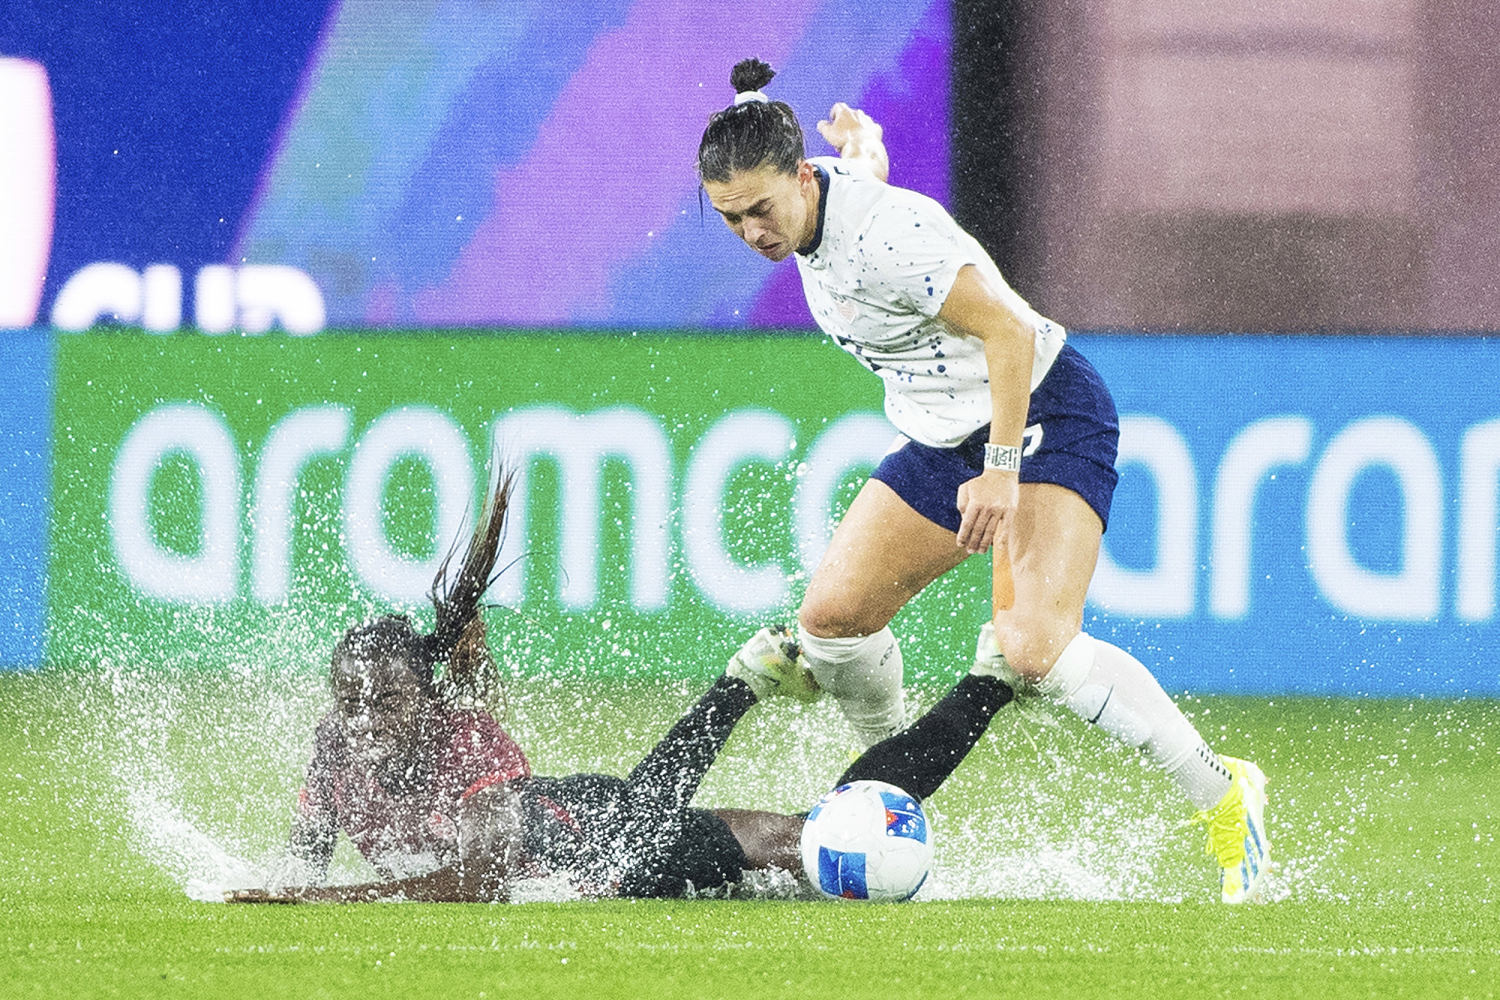 U.S. women beat Canada in dramatic game of puddles and penalty kicks